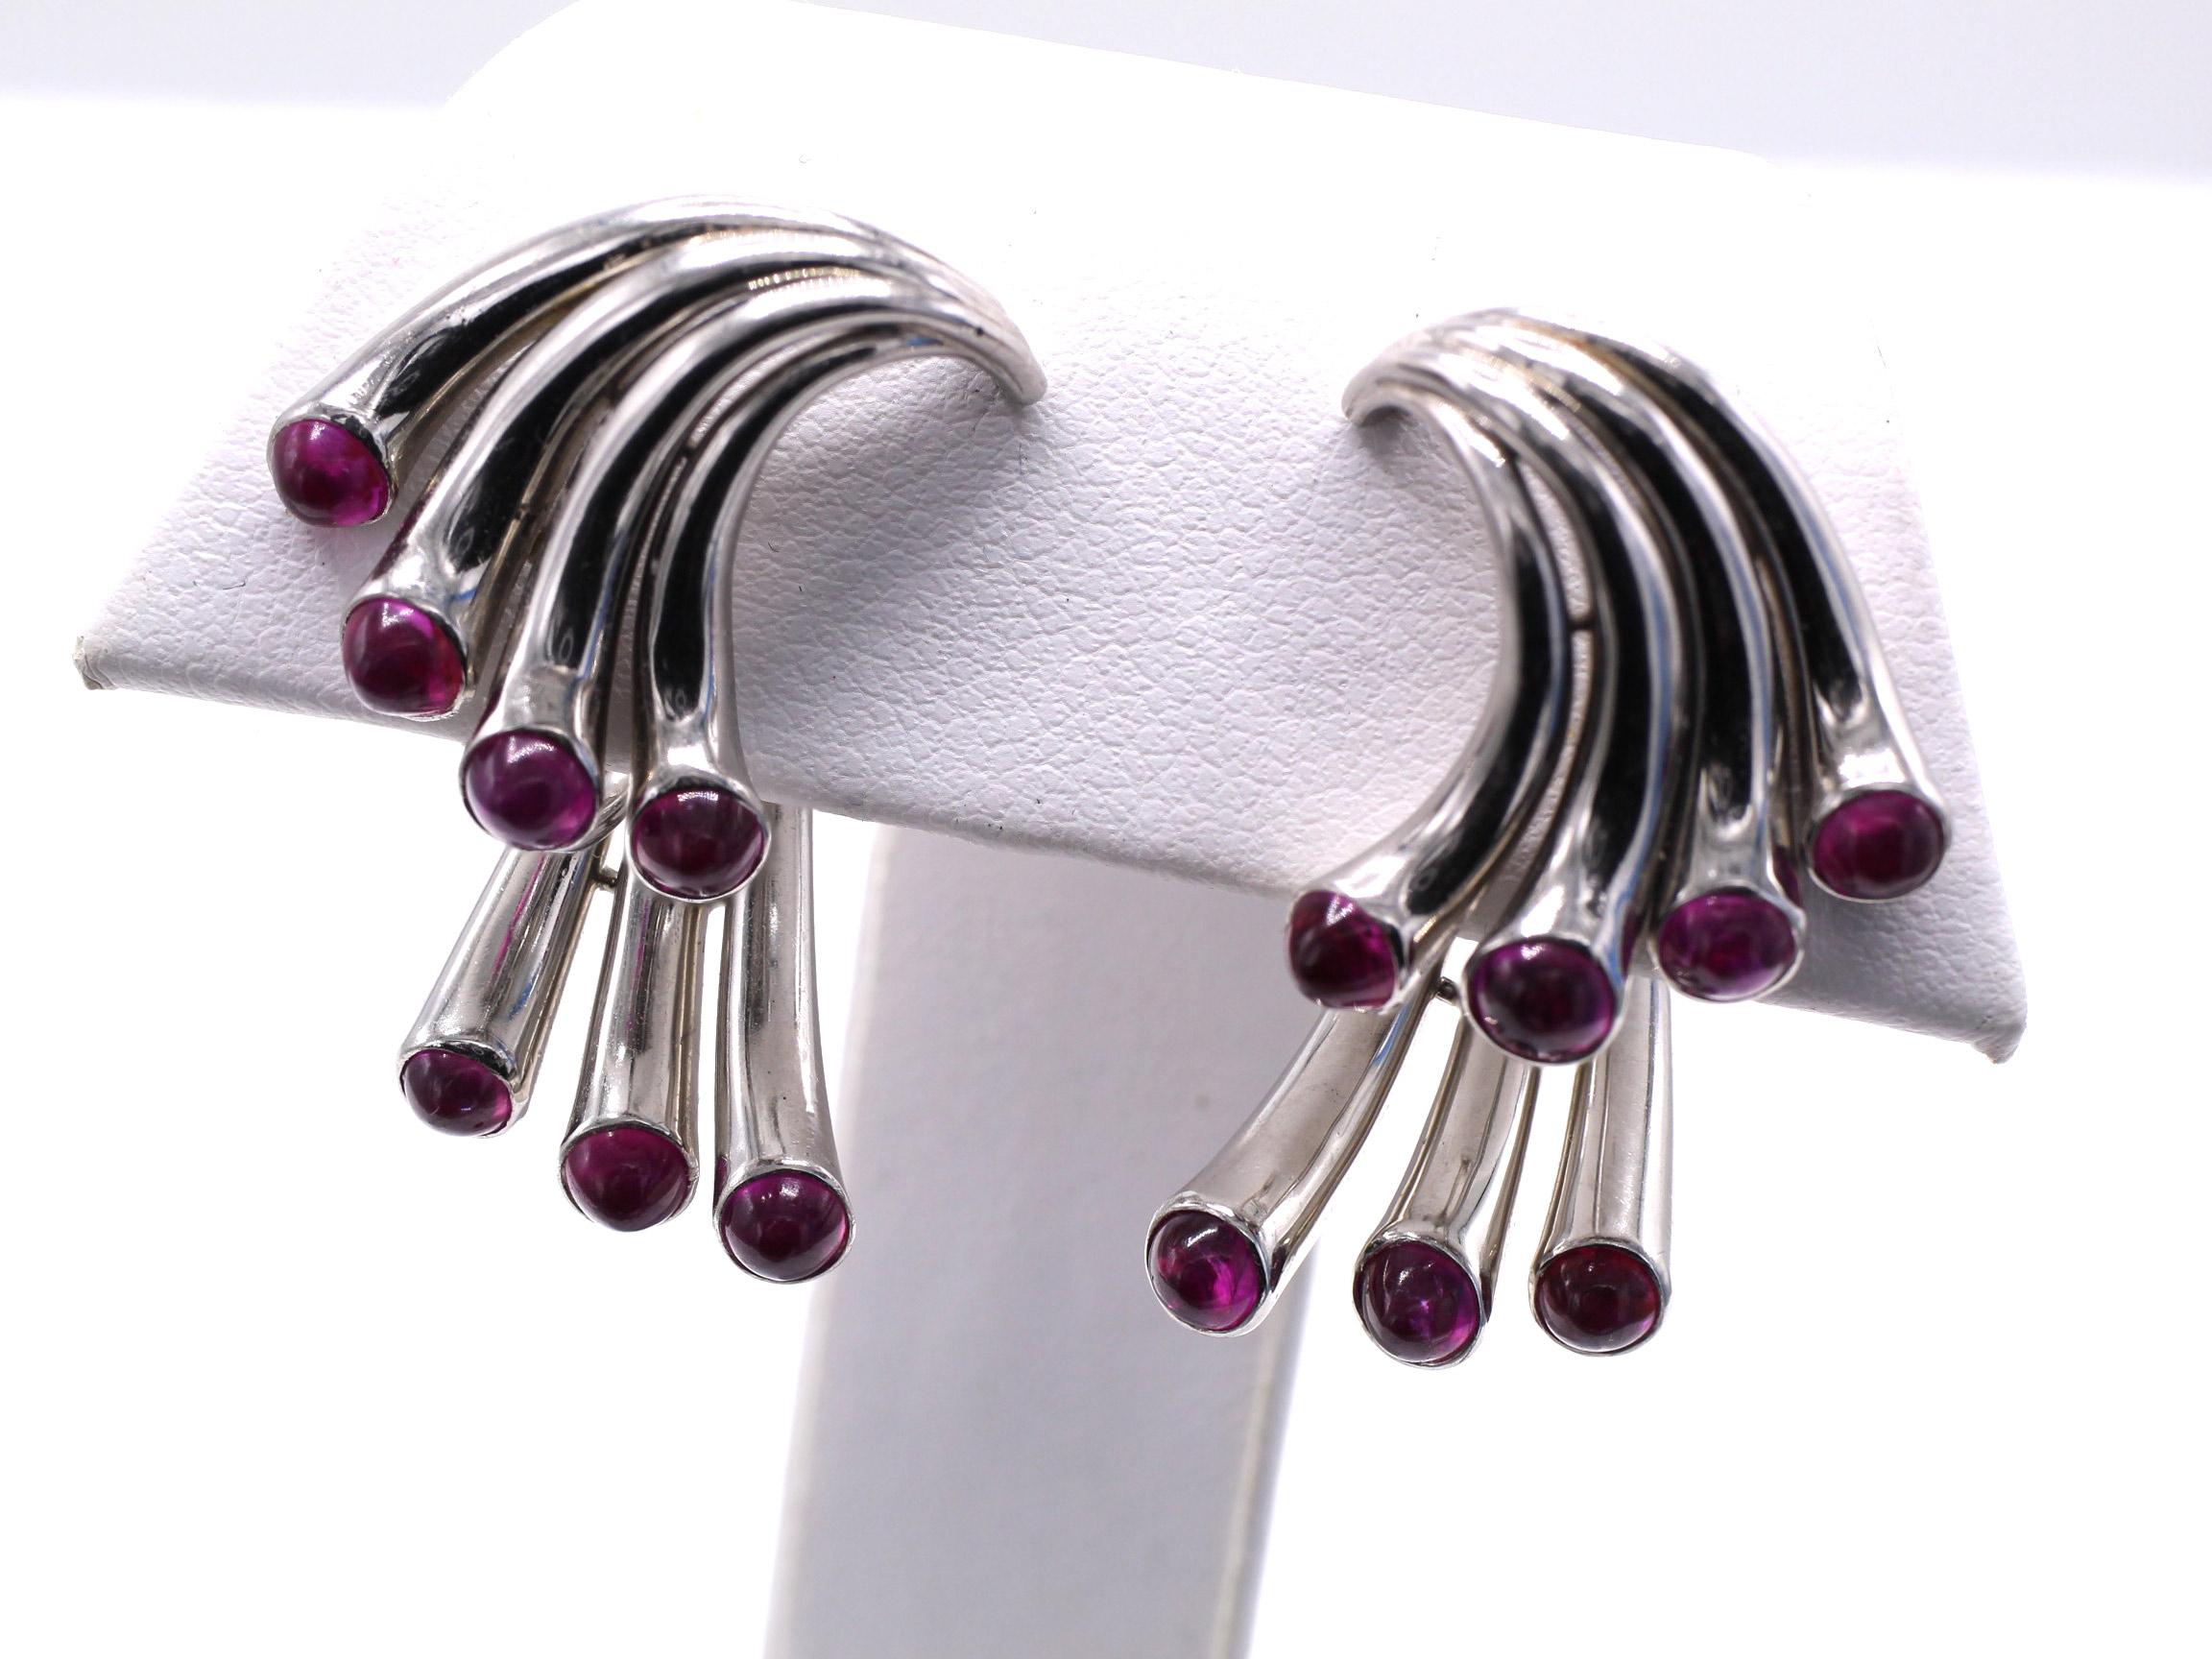 Amazingly designed and masterfully handcrafted in platinum, these unusual avant-garde ear clips are truly a piece of art on the ear. Curved platinum tubes curve outward, each set with a perfectly matched raspberry red cabochon ruby. The top is